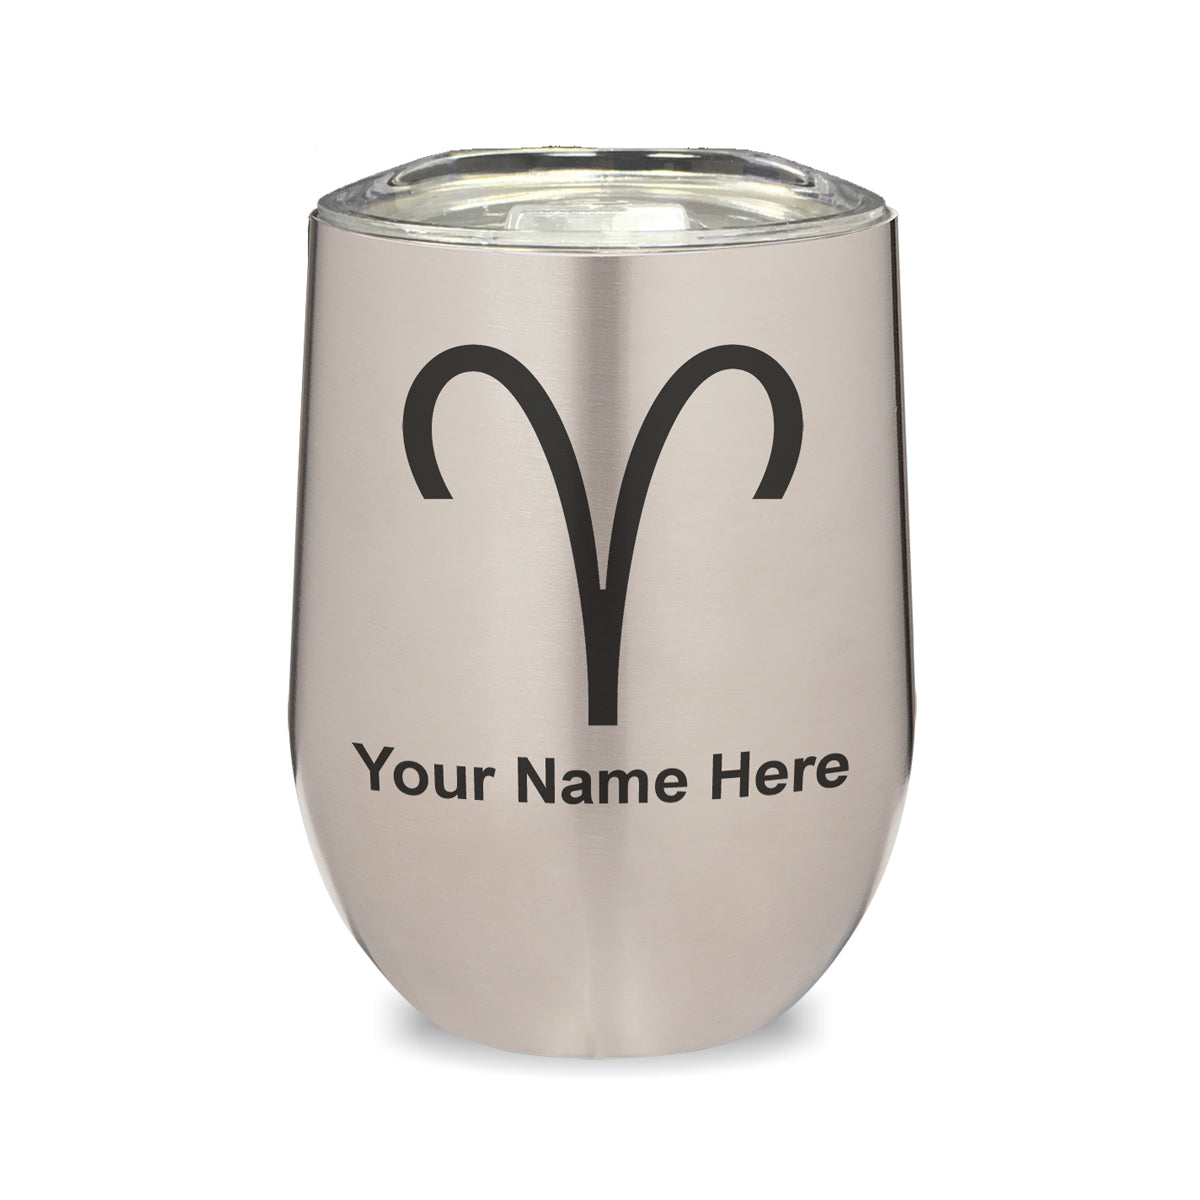 LaserGram Double Wall Stainless Steel Wine Glass, Zodiac Sign Aries, Personalized Engraving Included